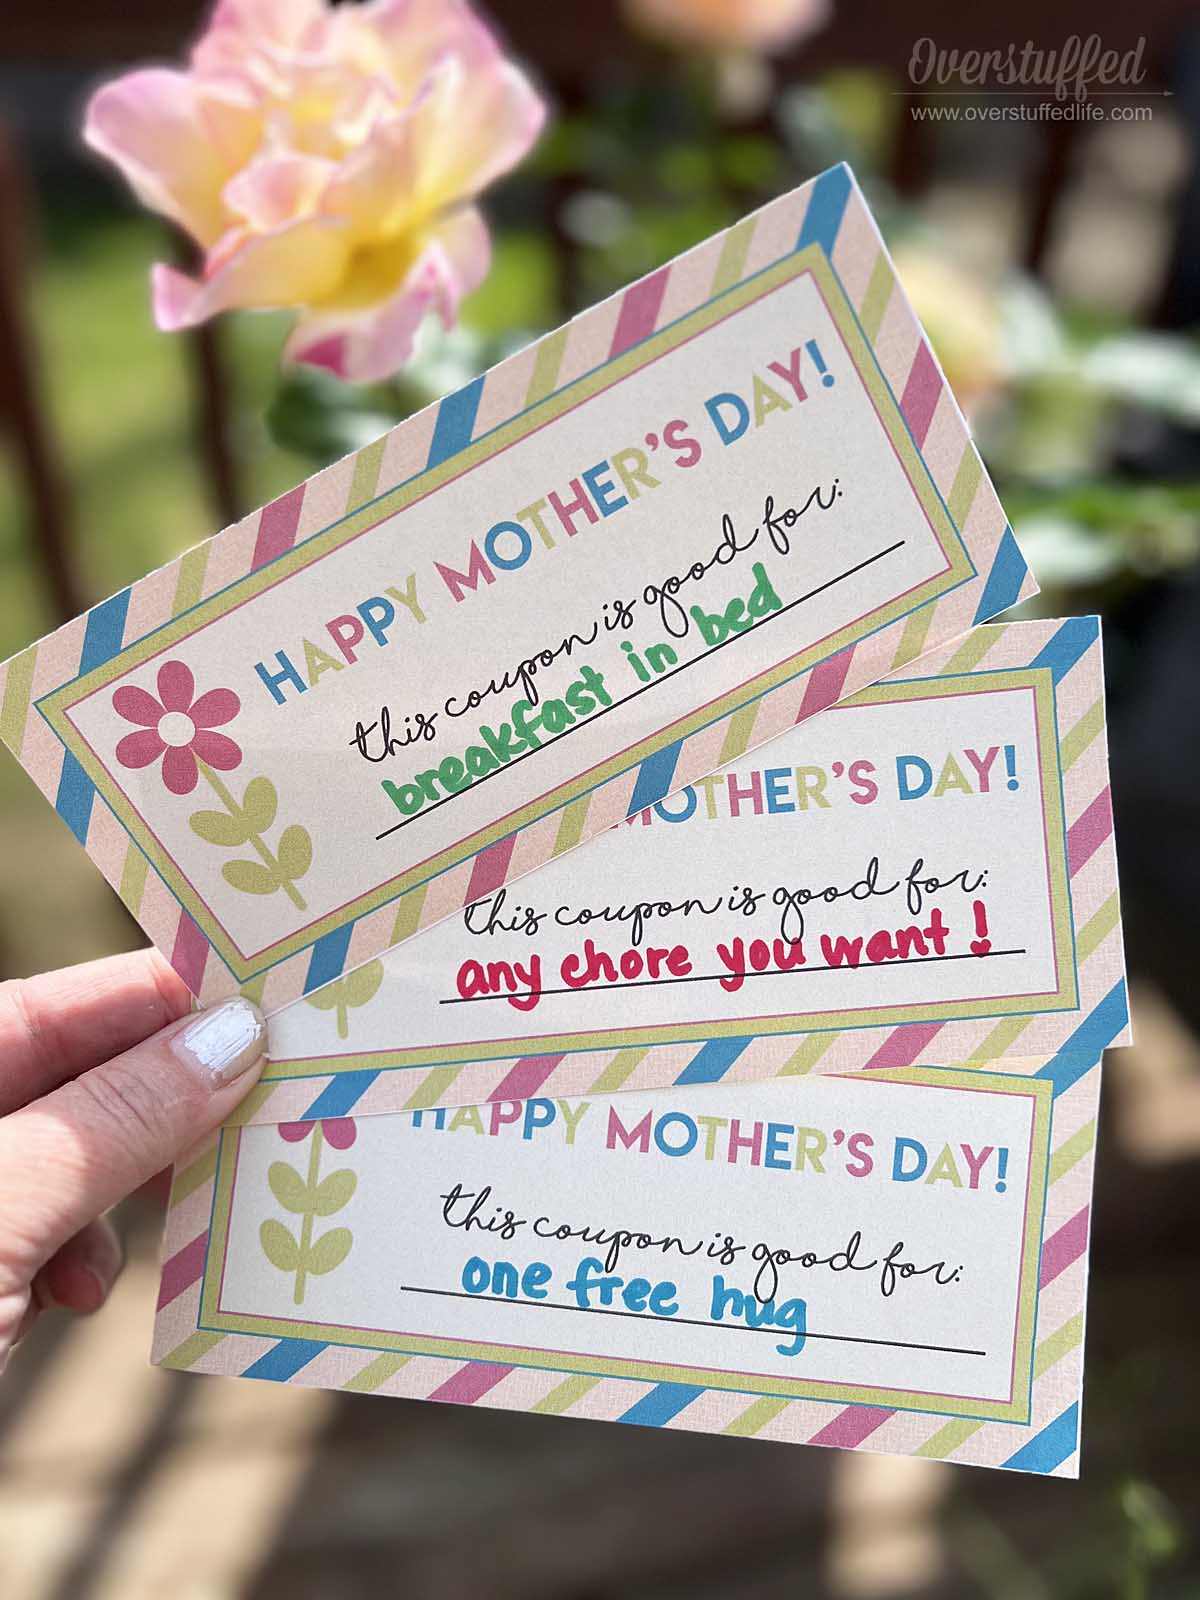 Free printable Mother's Day coupons! Download these free printable Mother's Day coupons, fill them out with things you know your mom loves, and then make them into a coupon book for Mother's Day! Make mom happy on her special day! via @lara_neves